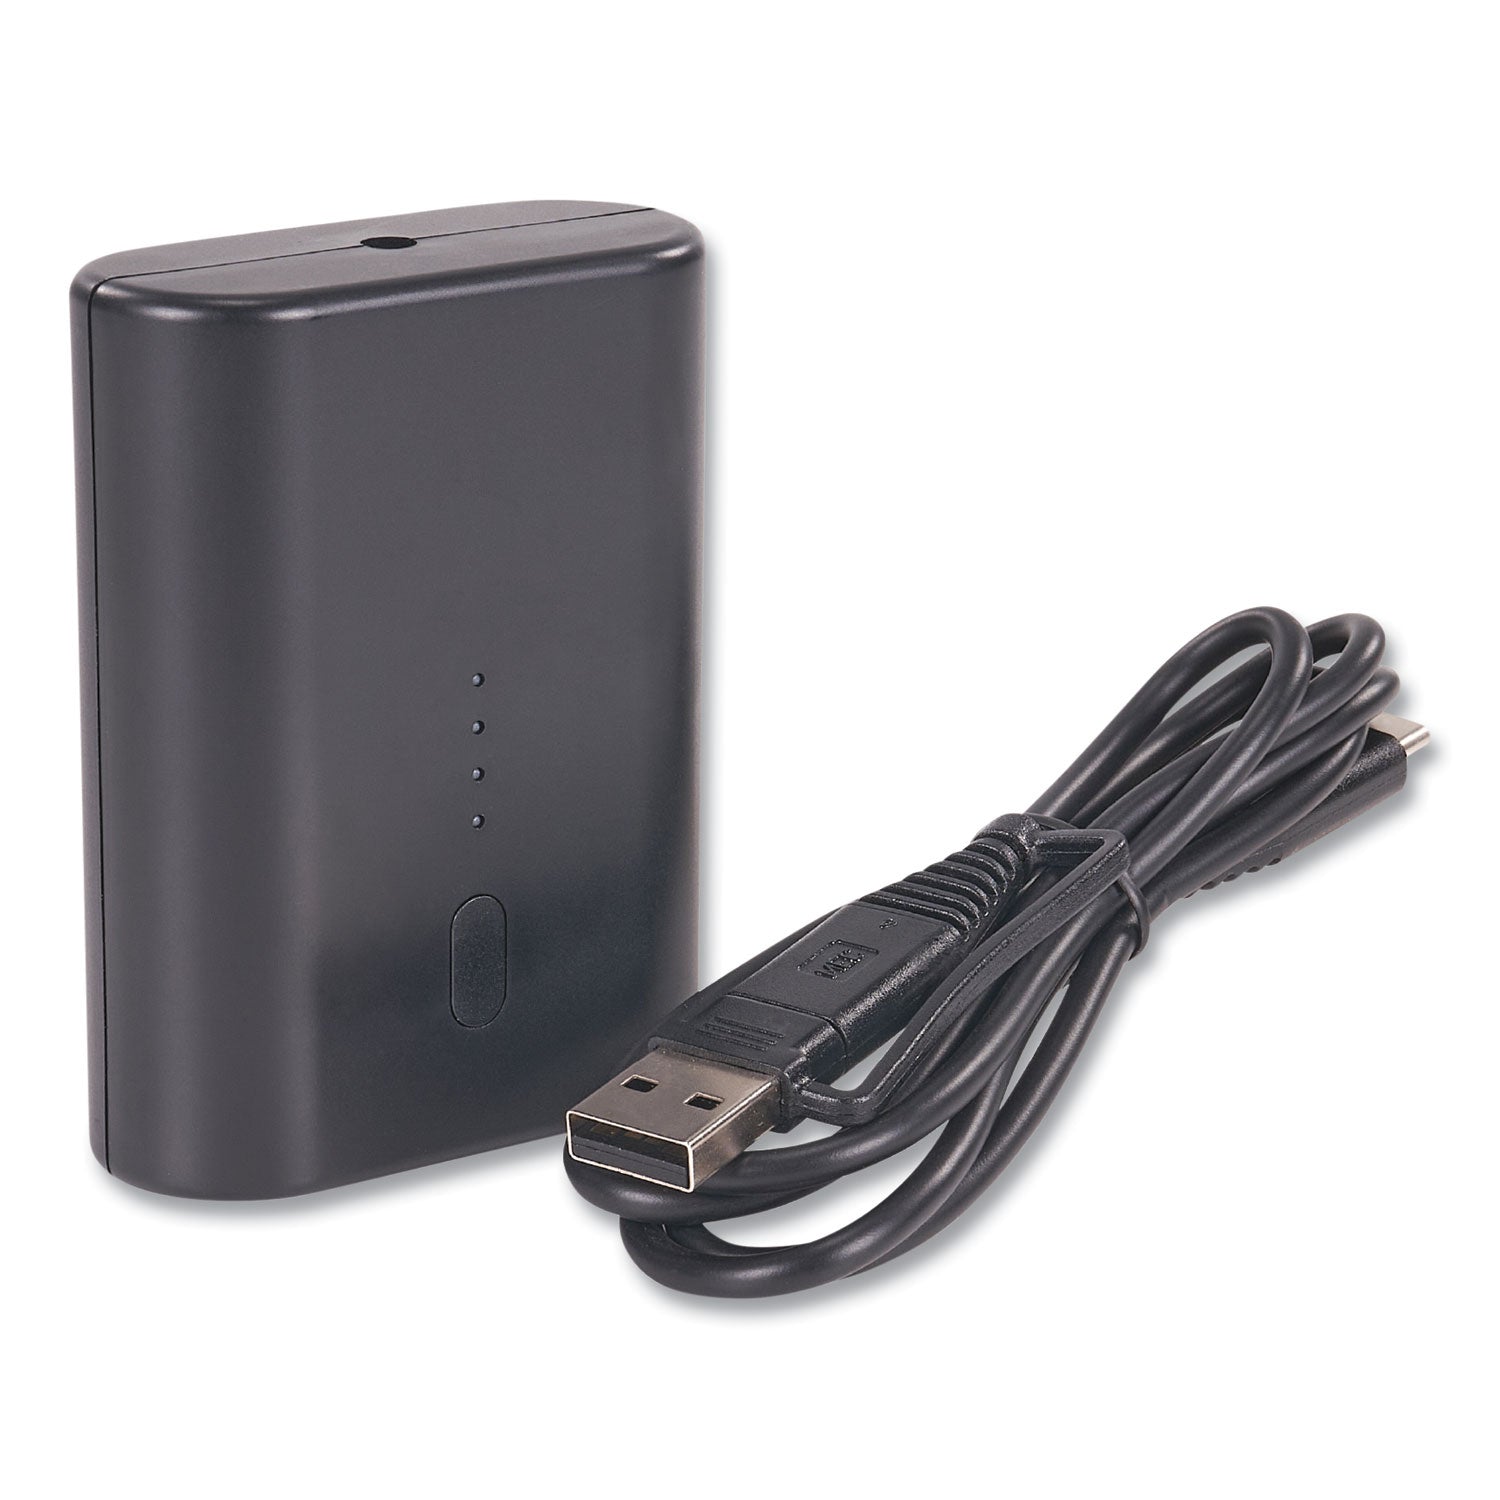 n-ferno-6495b-portable-battery-power-bank-with-usb-c-cord-72-v-ships-in-1-3-business-days_ego41801 - 1